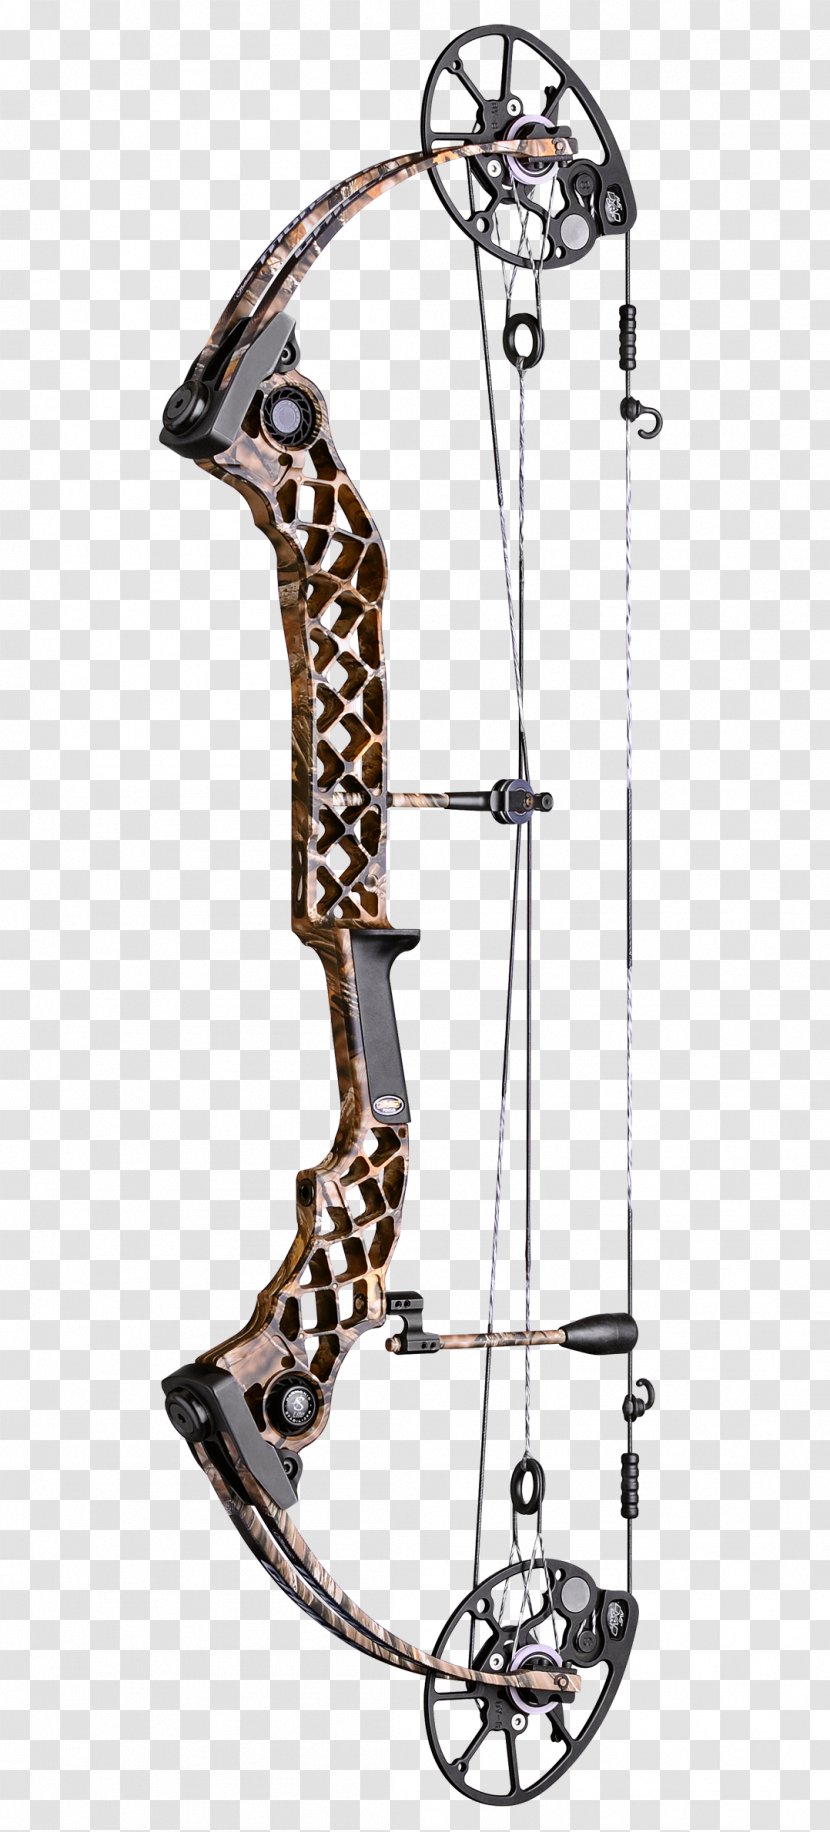 Compound Bows Bow And Arrow Bear Archery PSE - Hunting Transparent PNG